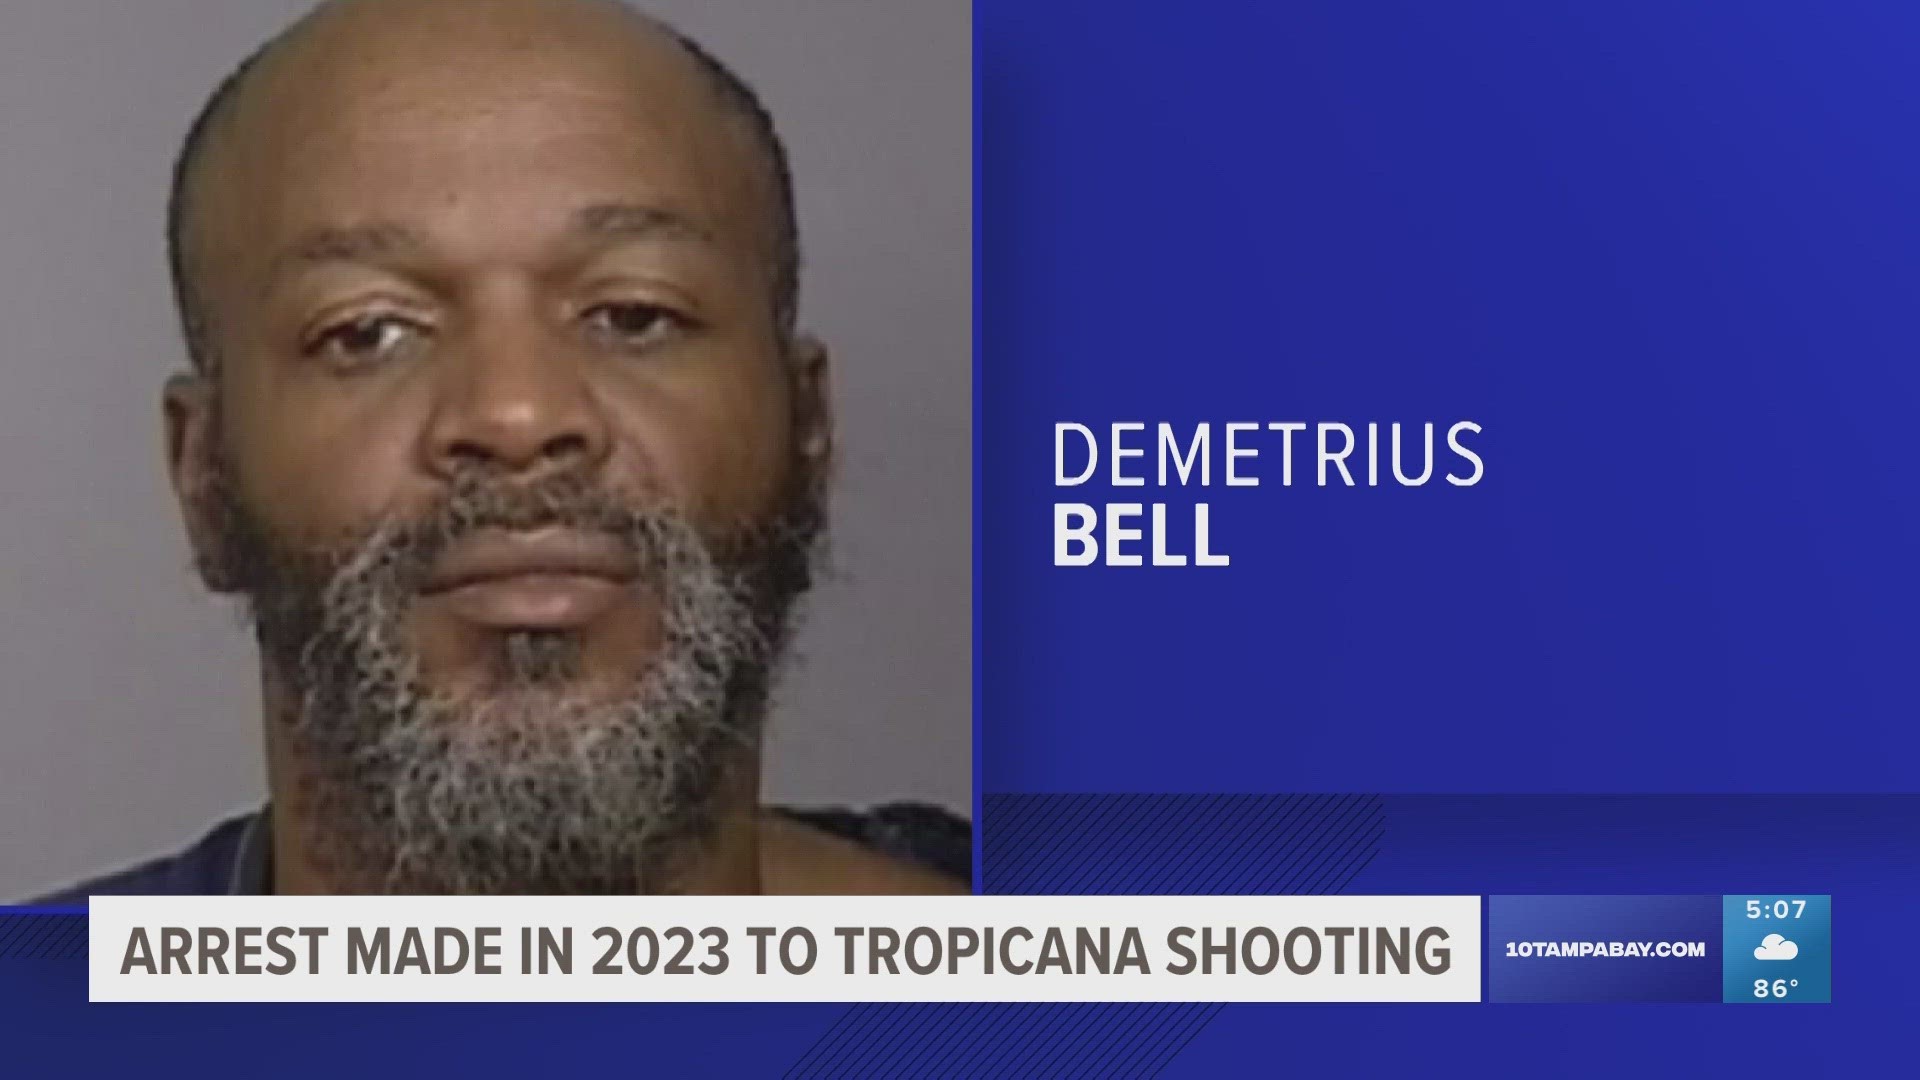 Demetrius Bell had been on the run since last June. Police say he entered the Tropicana Plant after his shift and shot a coworker.